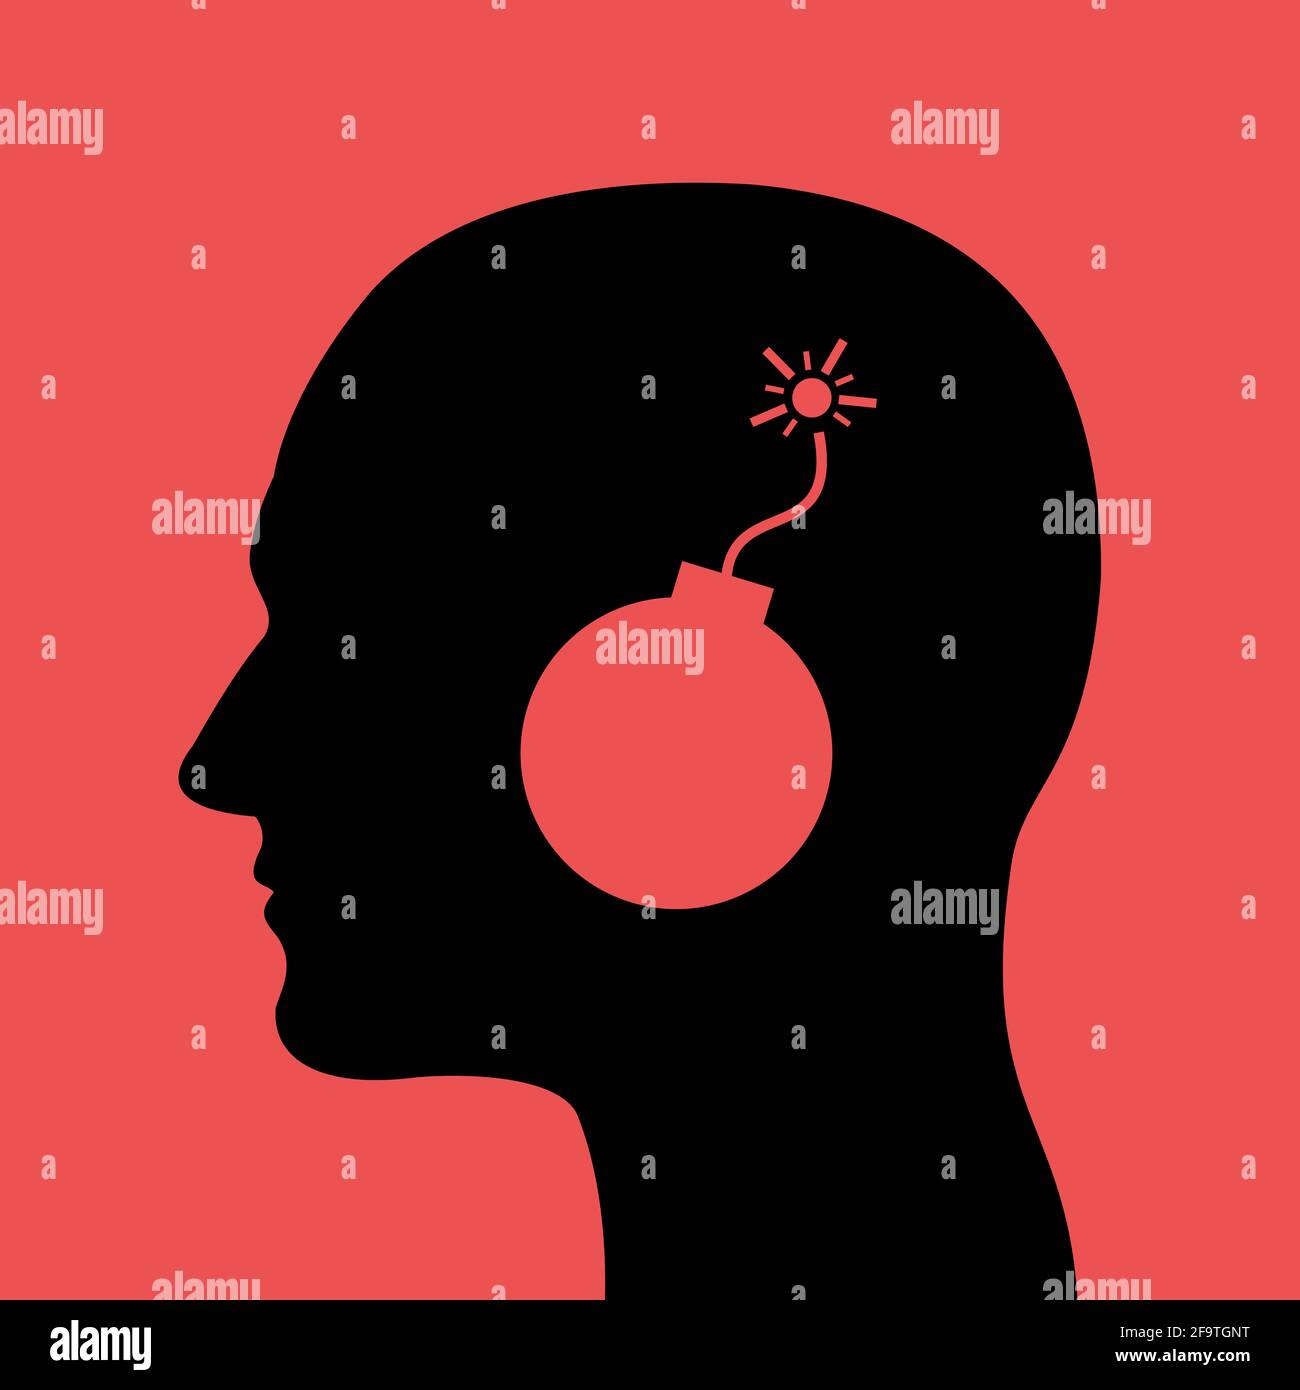 Head with bomb instead on brain. Danger of explosion and blow-up as metaphor of dangerous mental issue and breakdown of mind. Vector illustration. Stock Photo